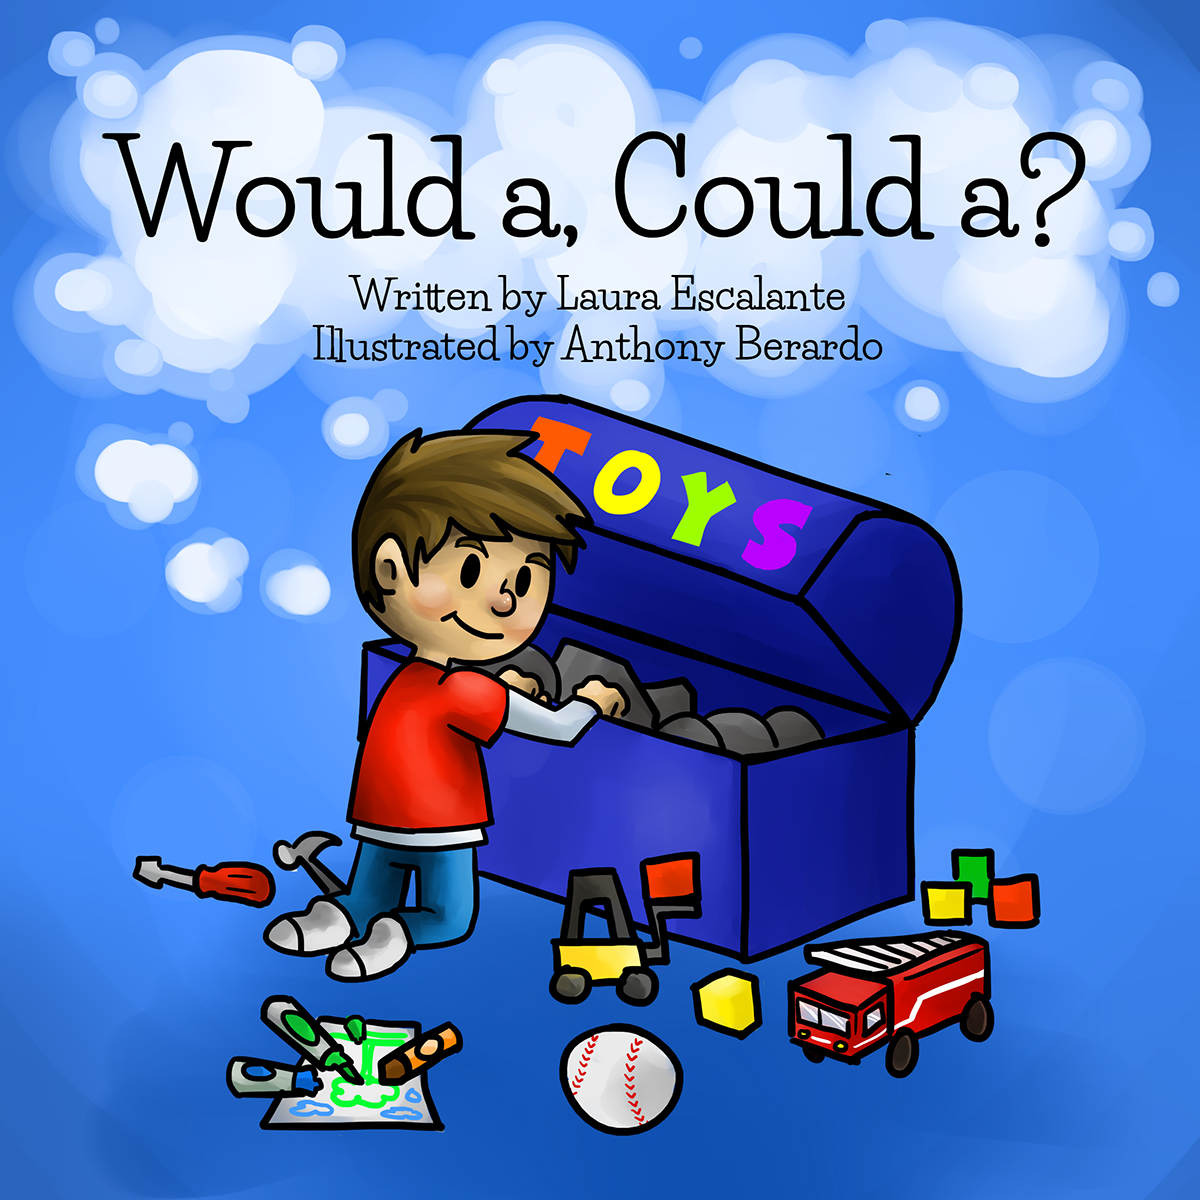 would a could a childrens book Picture book imagination poem